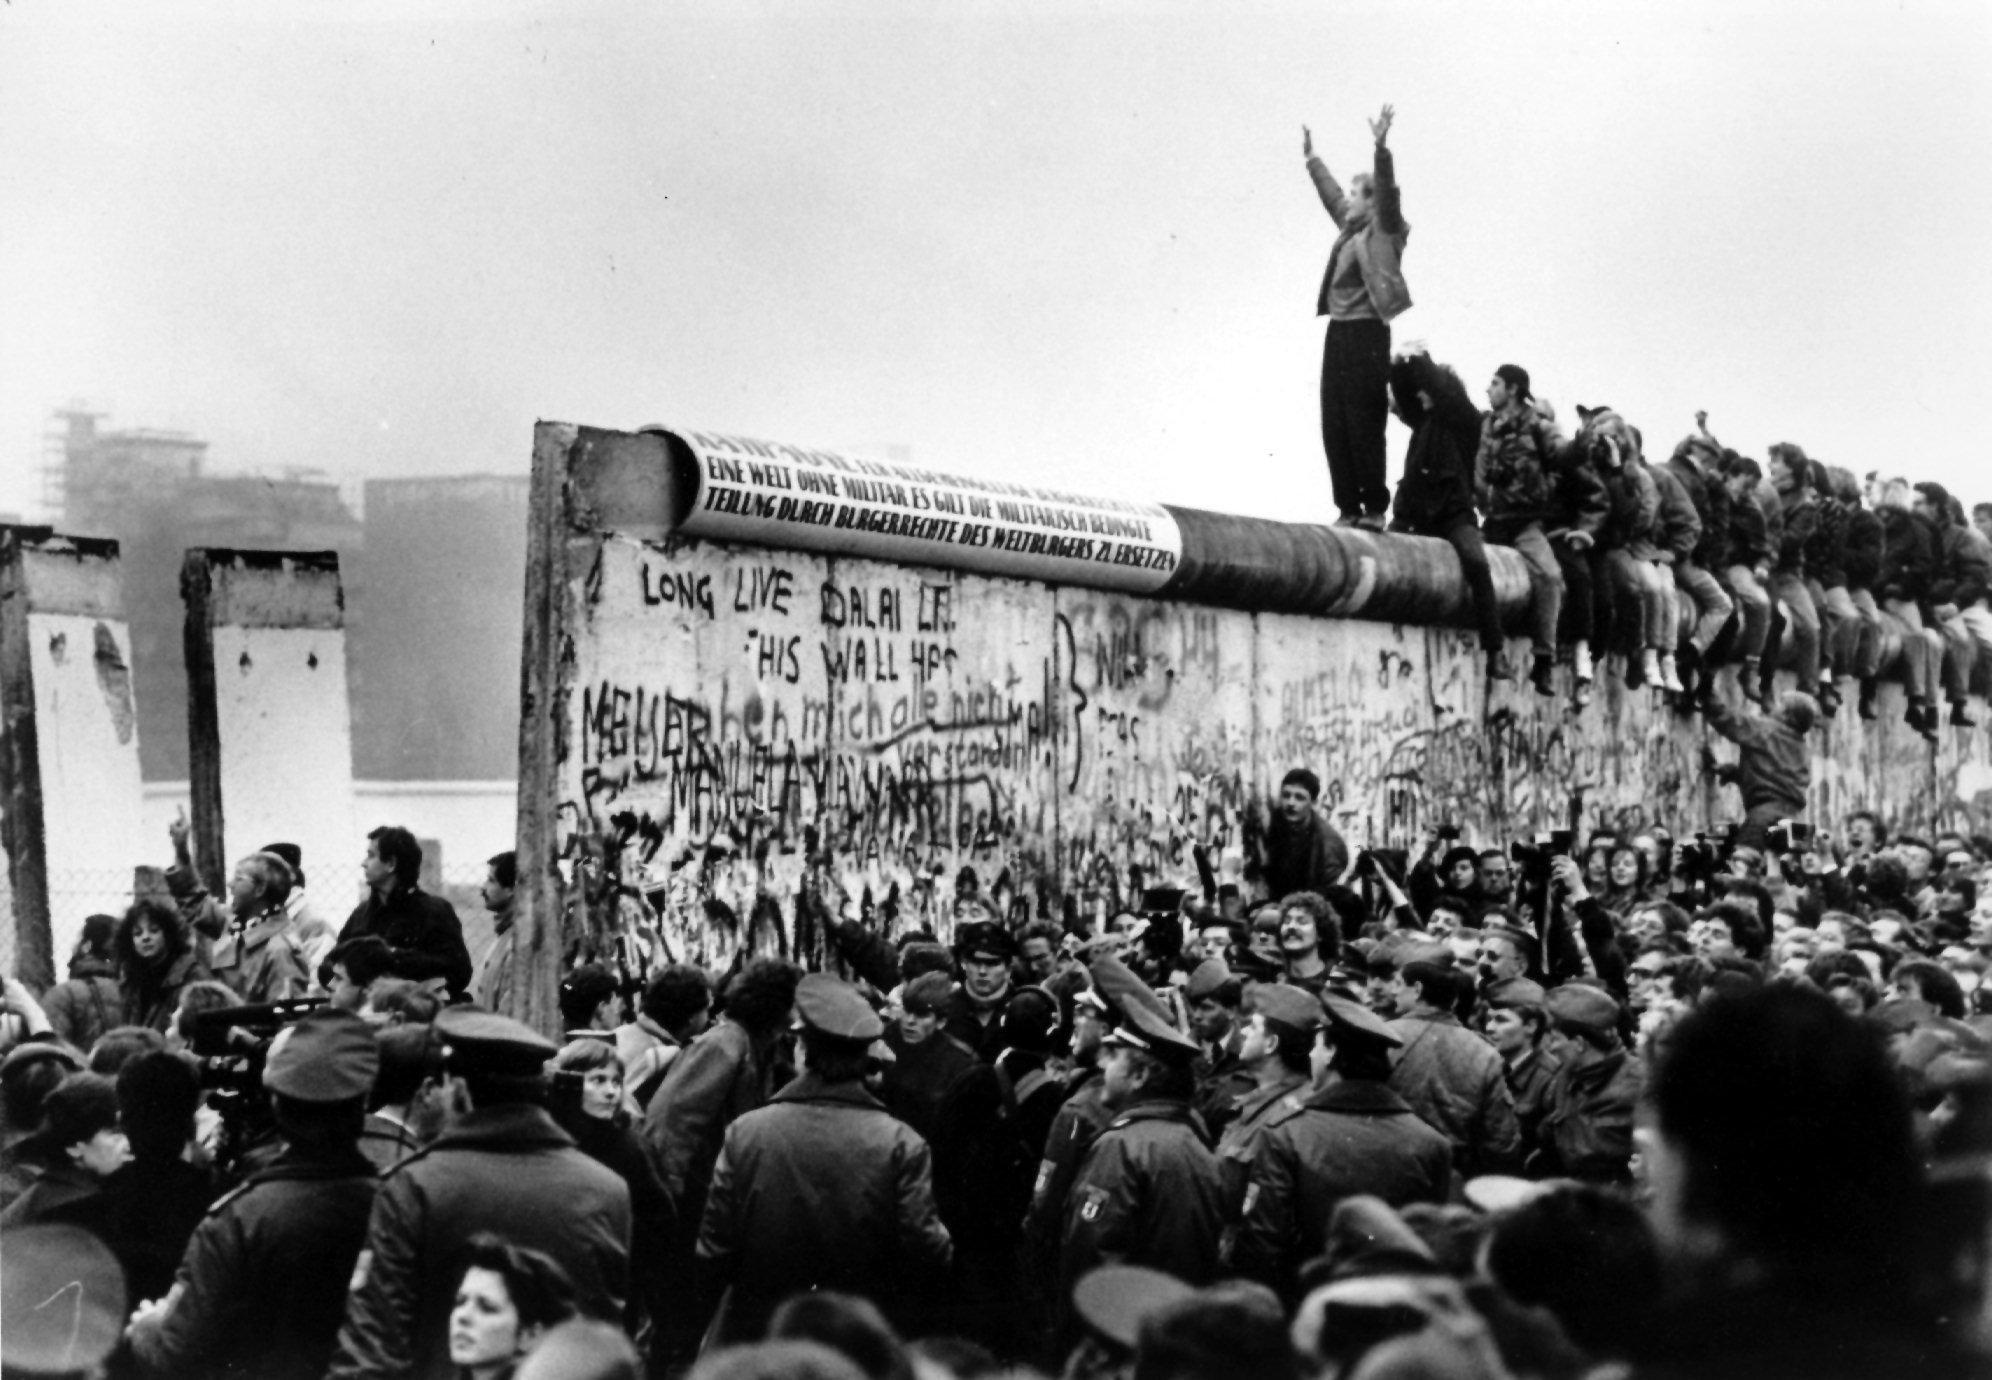 Since the collapse of the Berlin Wall, globalisation has been a divisive topic, with supporters crediting it with lifting 650 million people out of poverty while detractors blame it for slow income growth in rich countries. Photo: The Washington Post